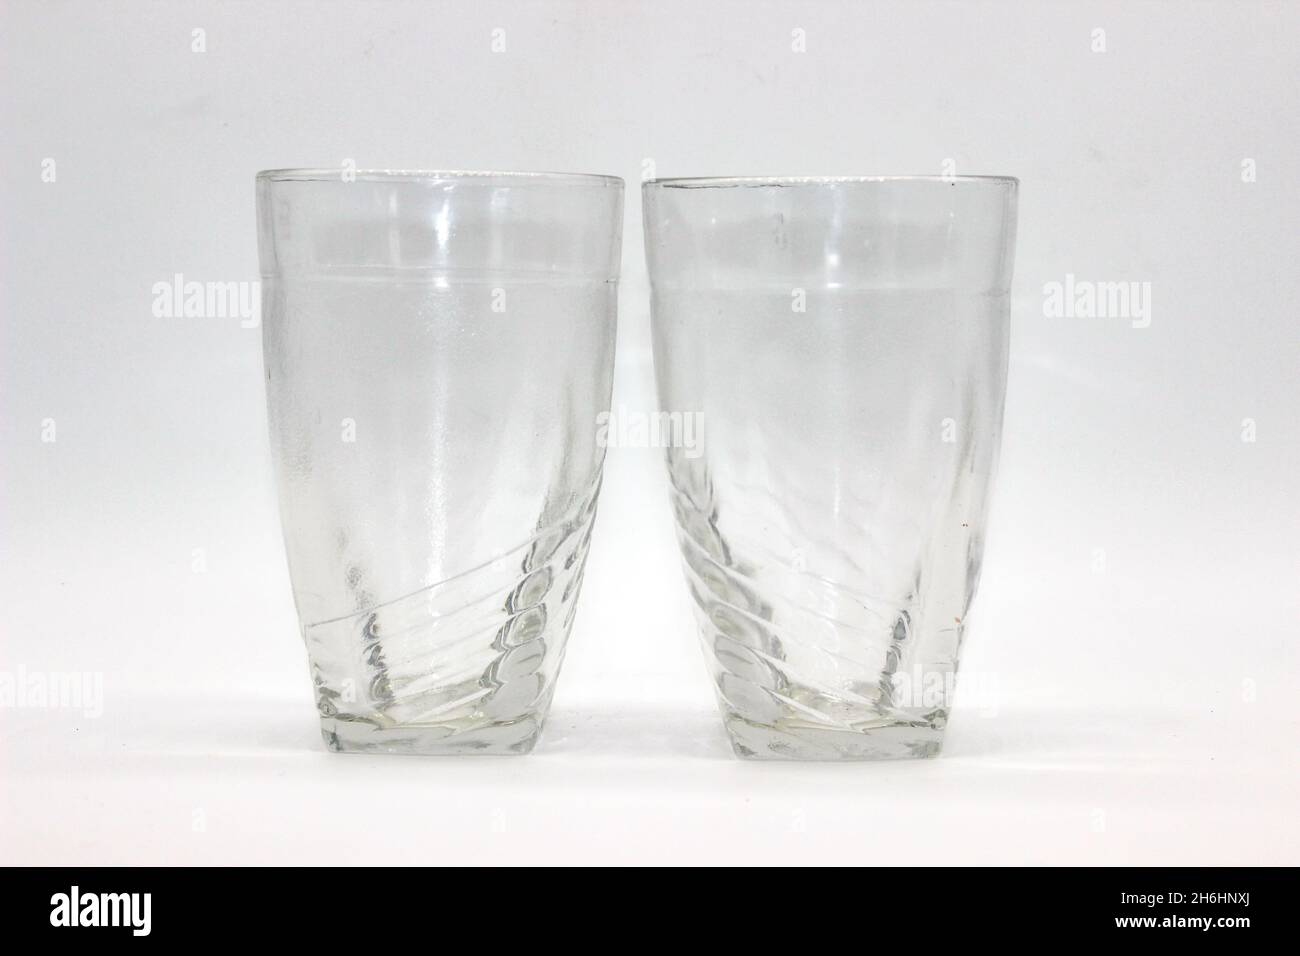 https://c8.alamy.com/comp/2H6HNXJ/glass-tumblers-isolated-on-white-background-with-selective-focus-2H6HNXJ.jpg